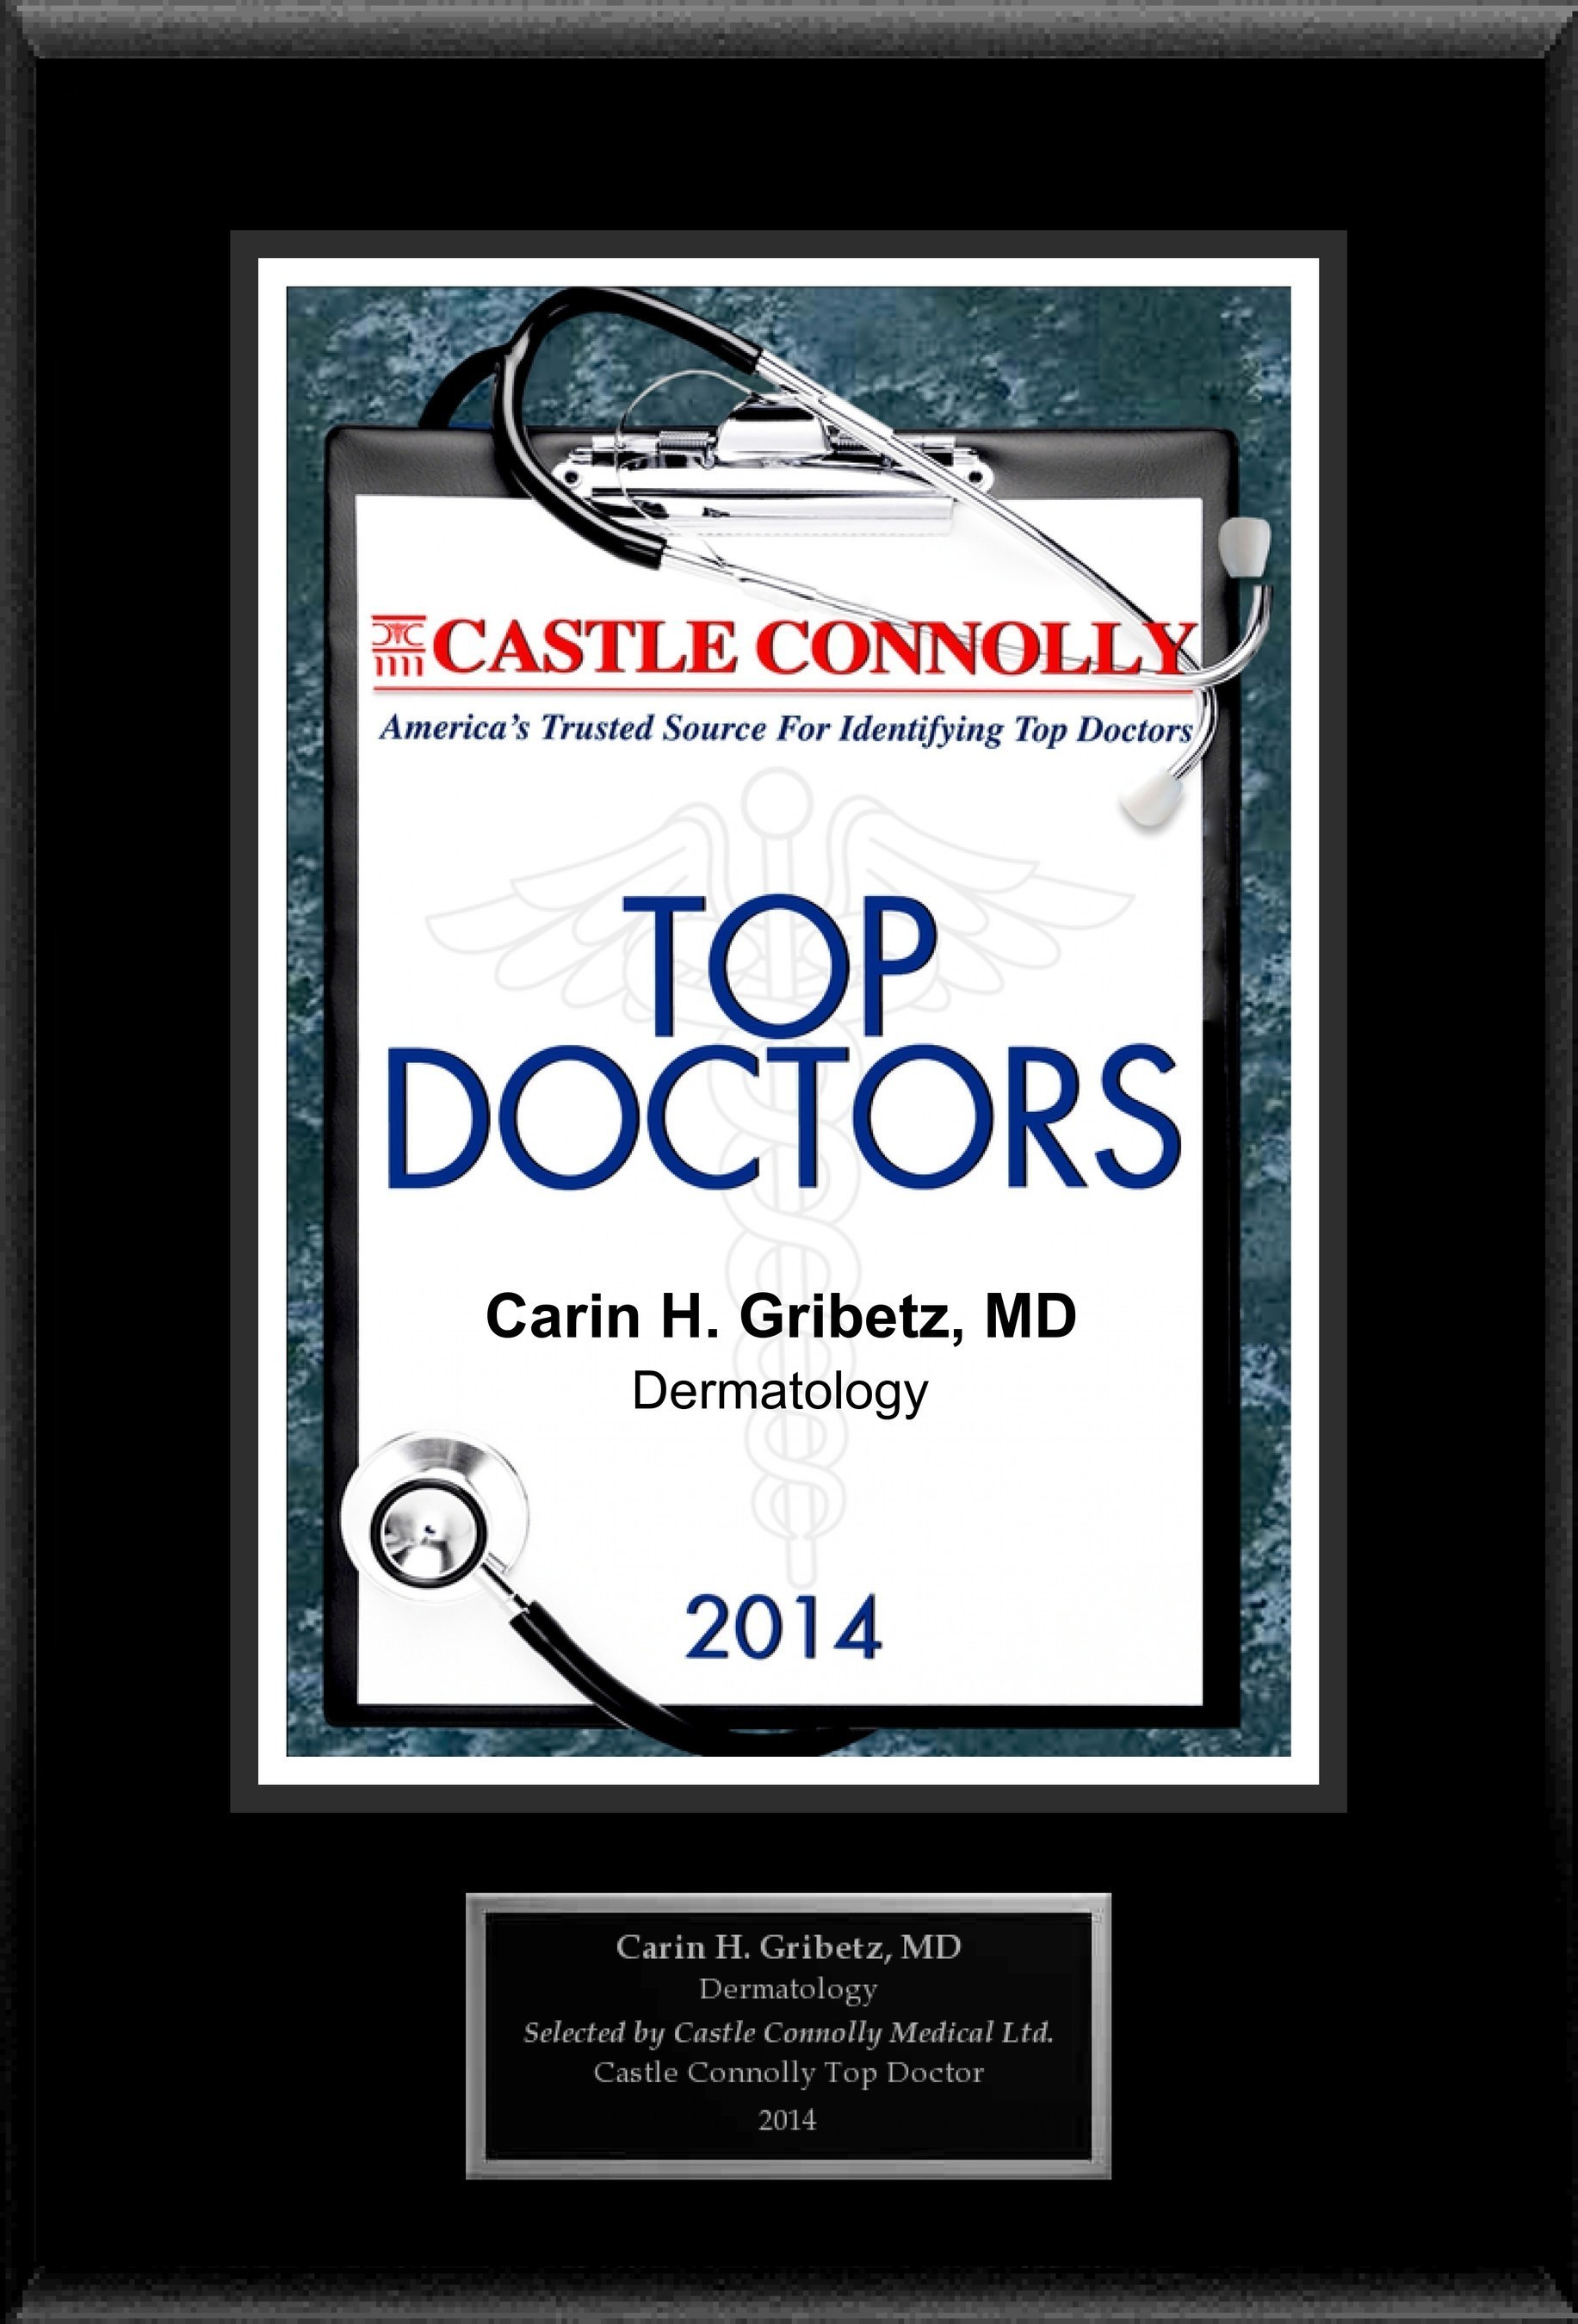 Dr. Carin H. Gribetz is recognized among Castle Connolly's Top Doctors(R) for New York, NY region in 2014.